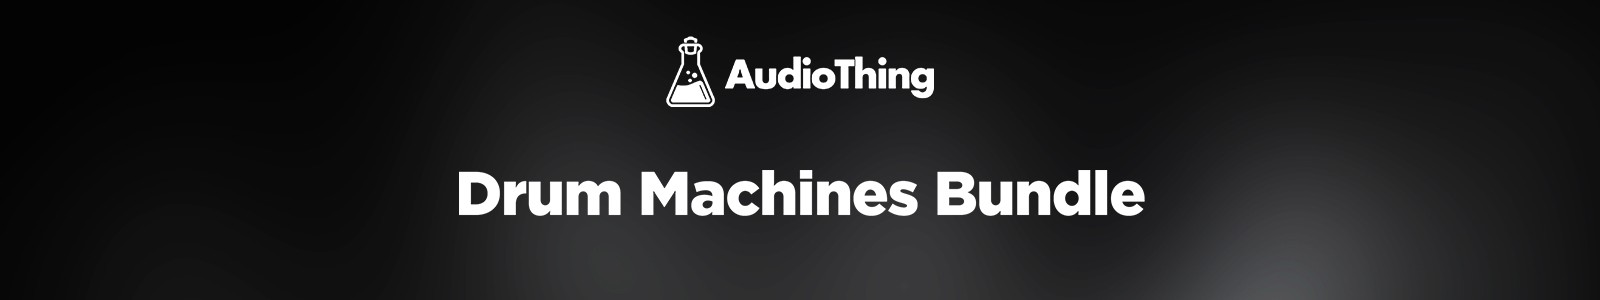 Drum Machines by AudioThing